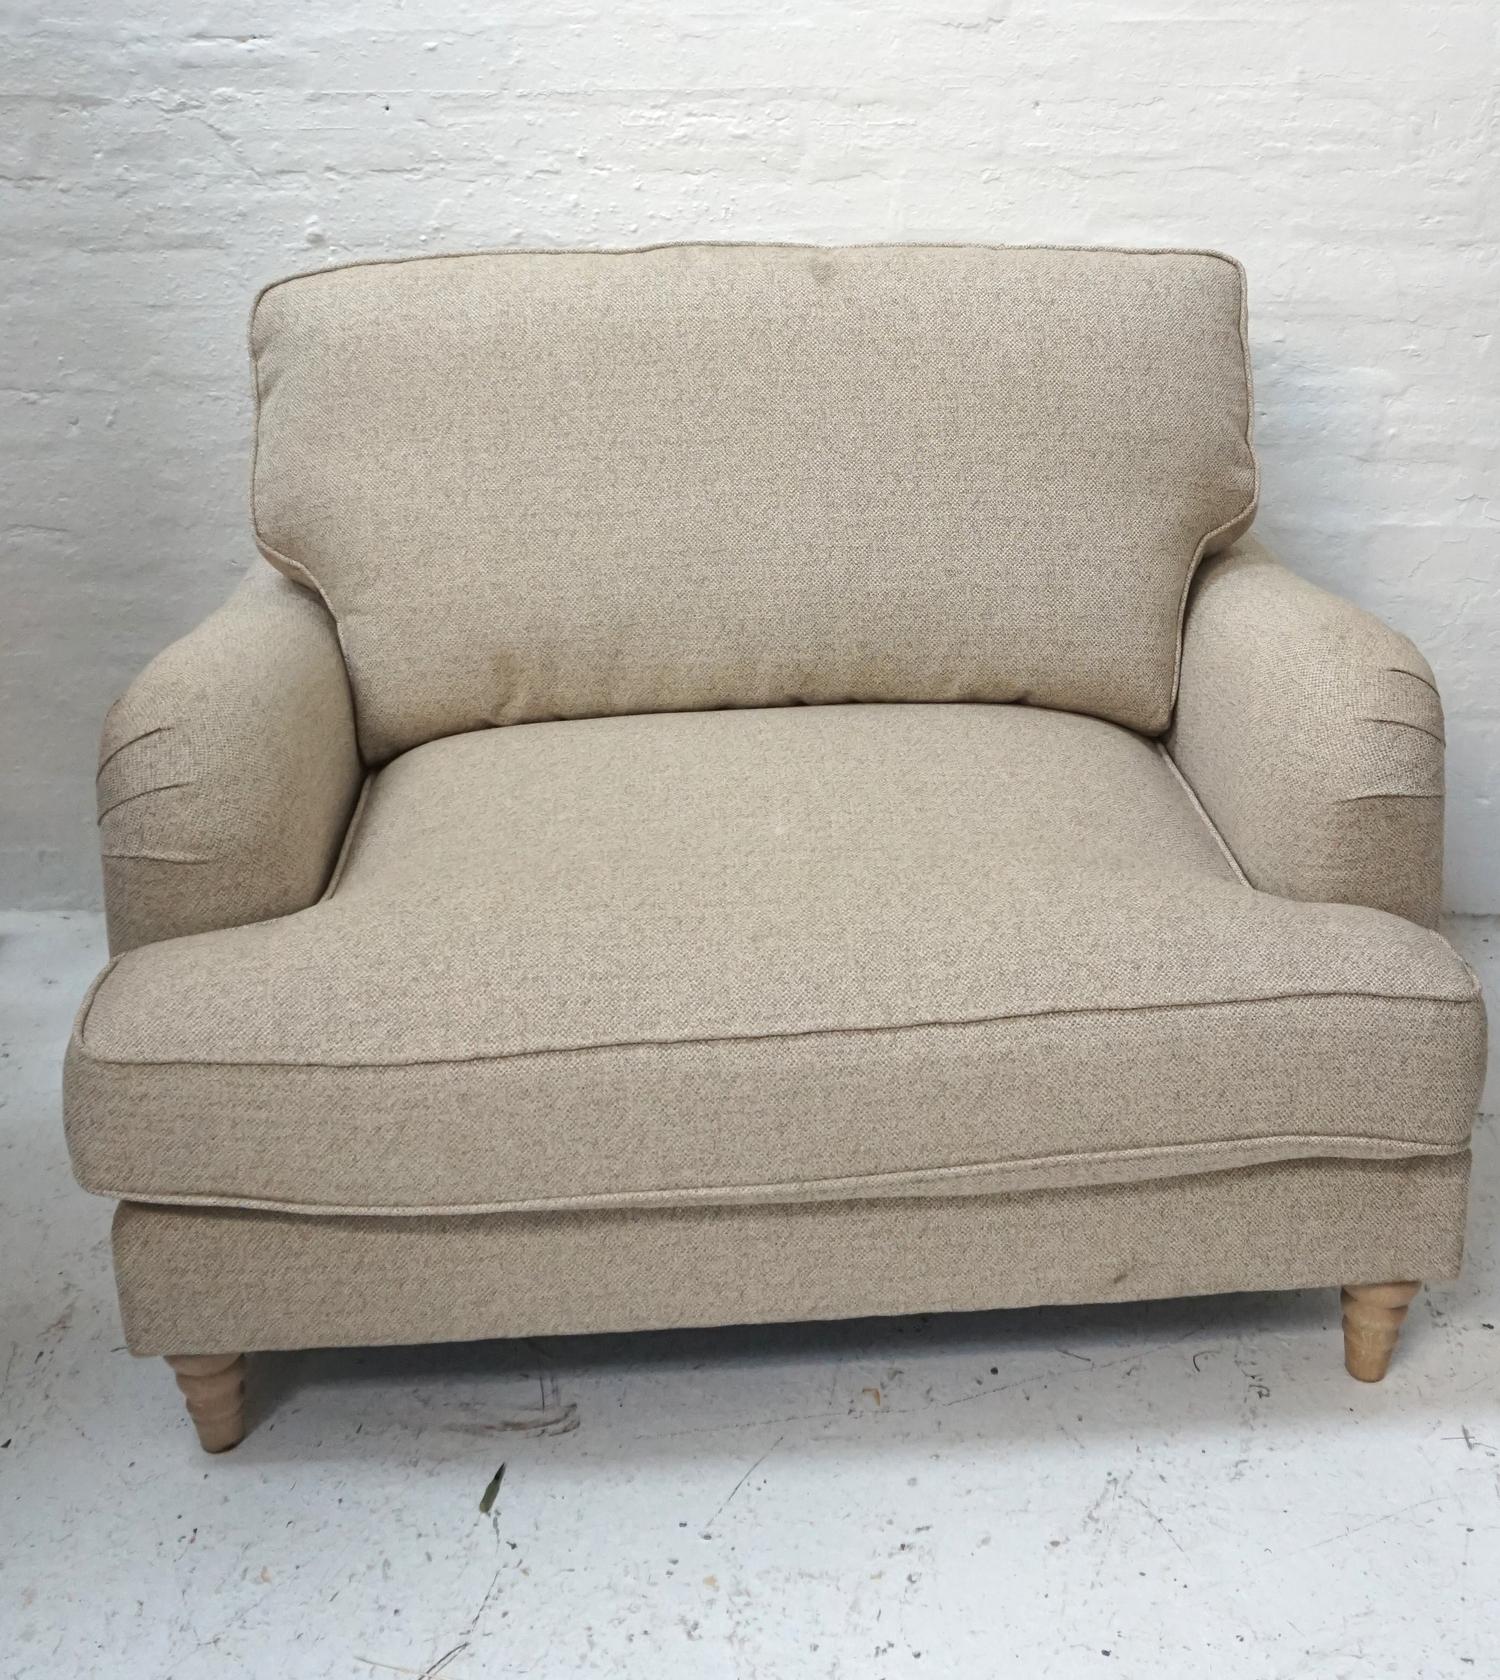 OVERSIZED MODERN ARMCHAIR with a shaped back with loose back and seat cushion, covered in a speckled